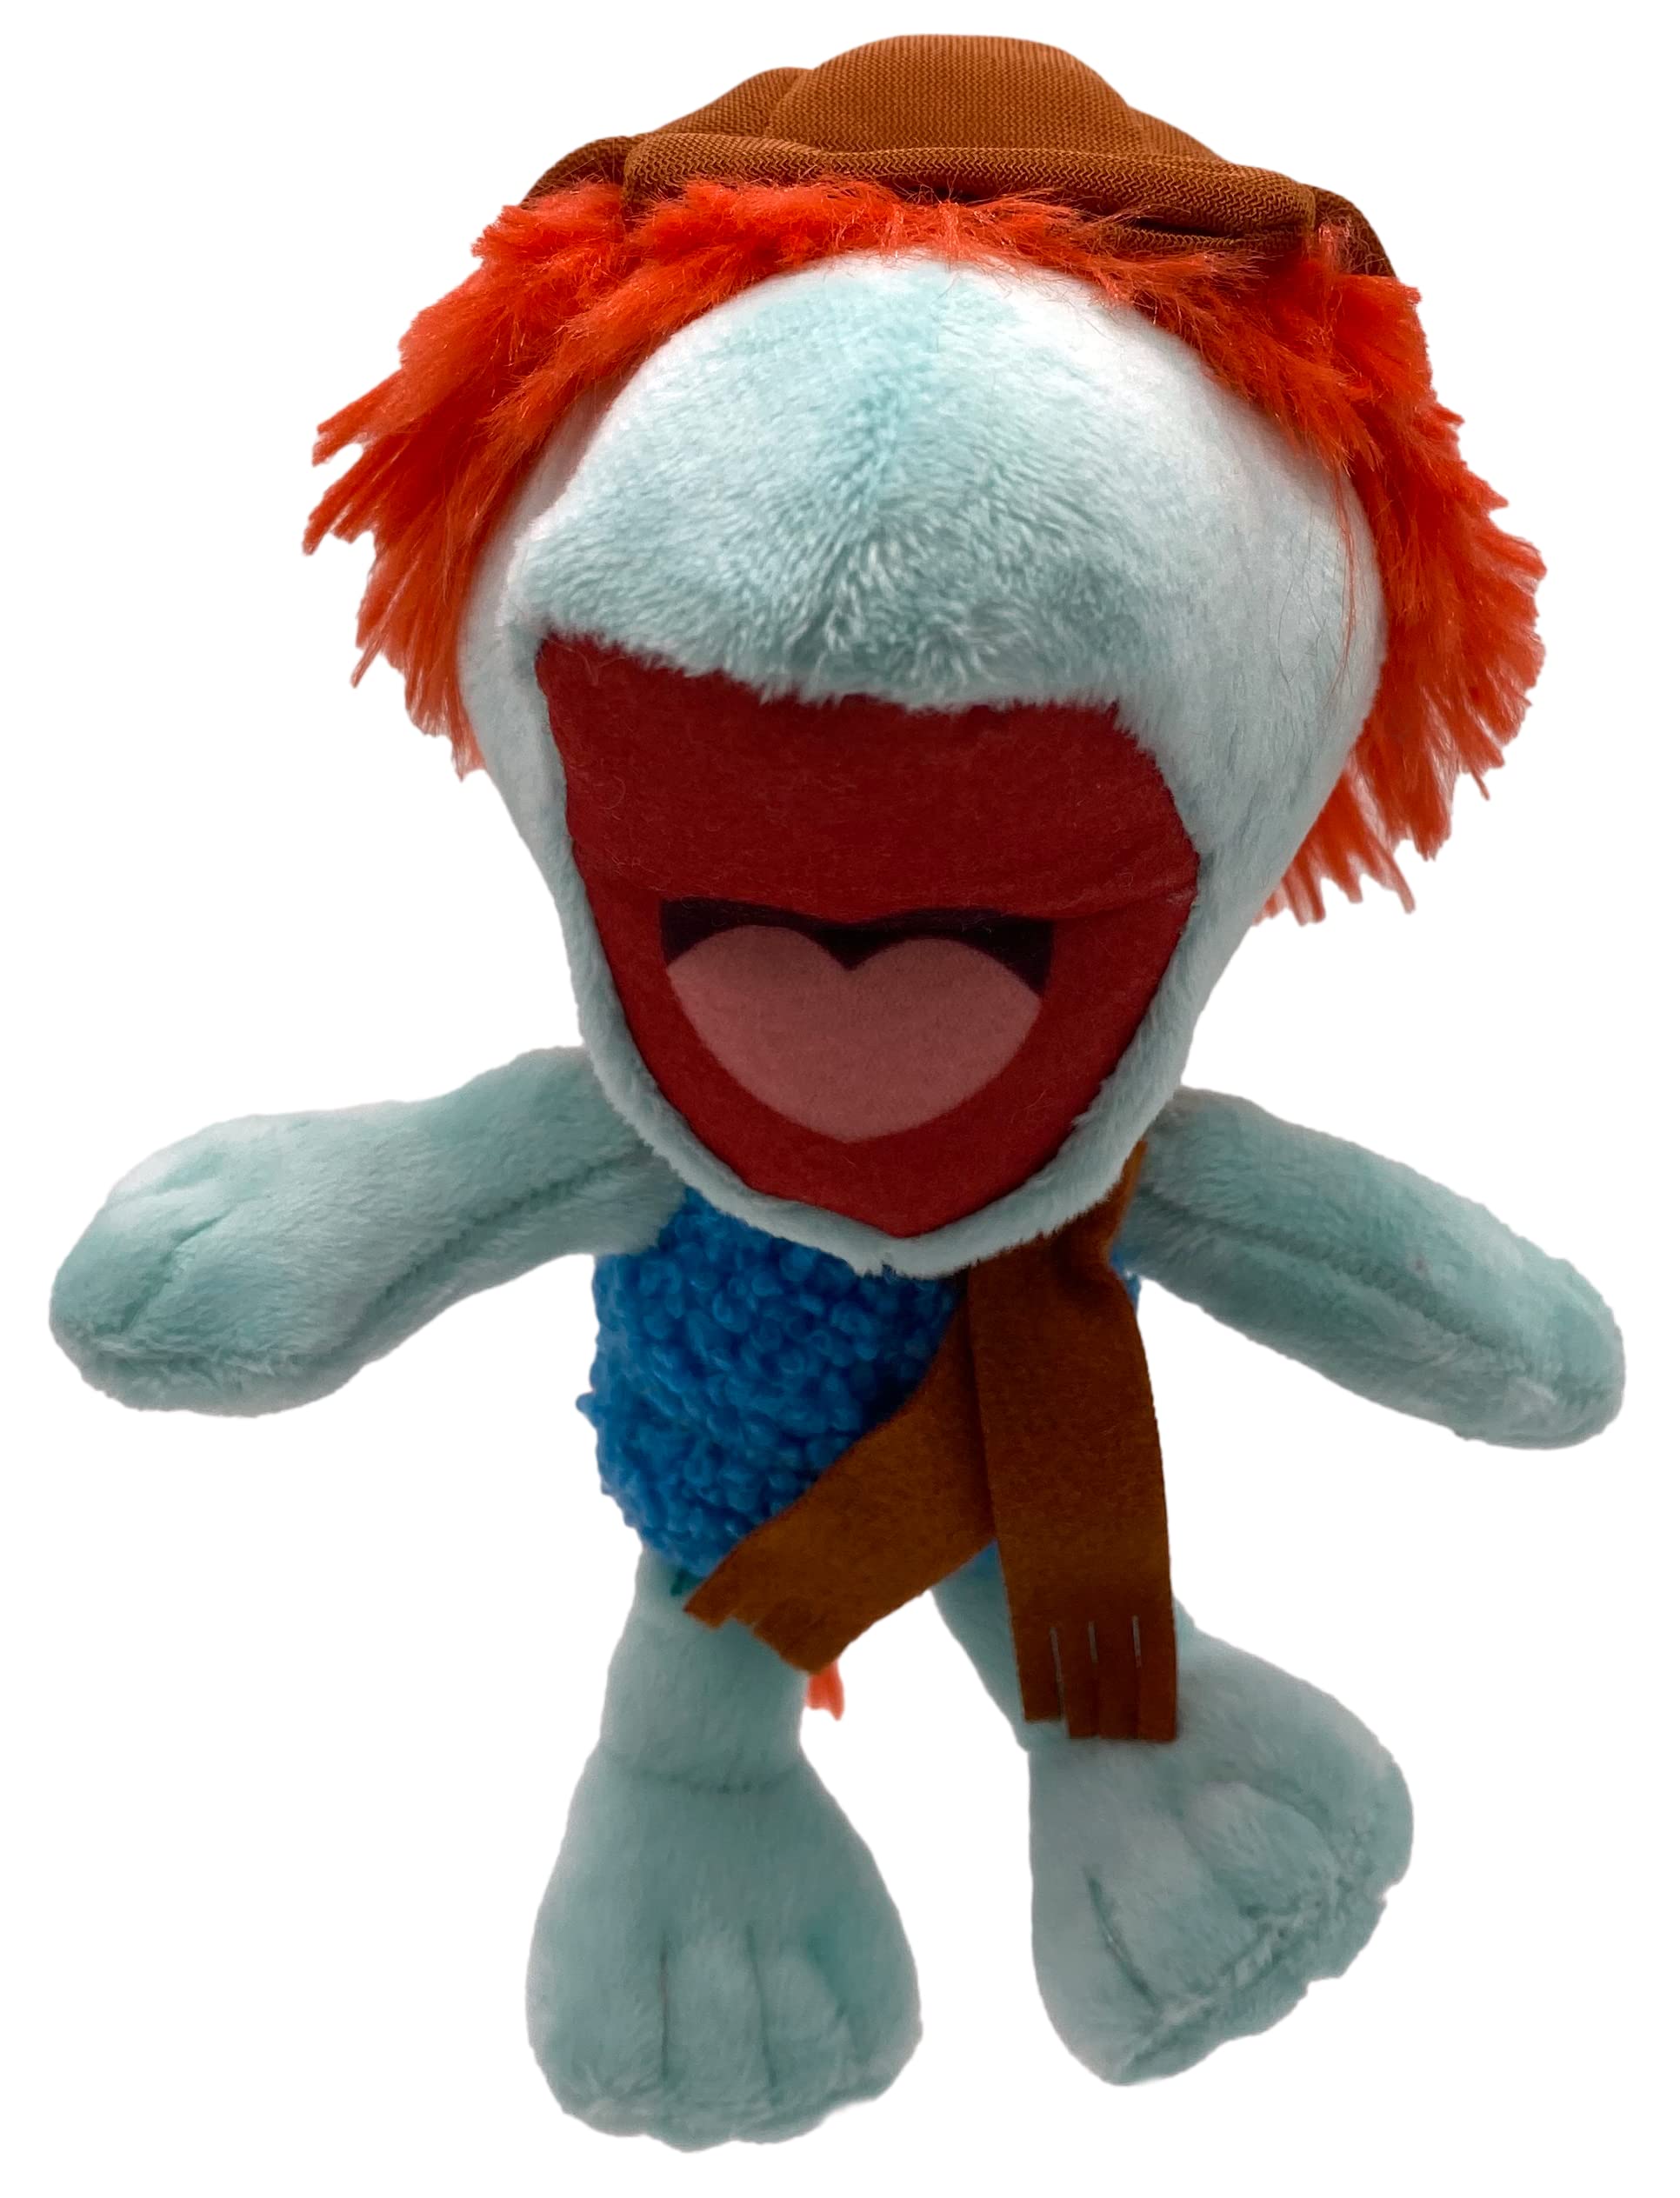 Boober Small Plush Toy 7.5" Fraggle Rock Stuffed Figure Apple TV+ Series for Fans of All Ages